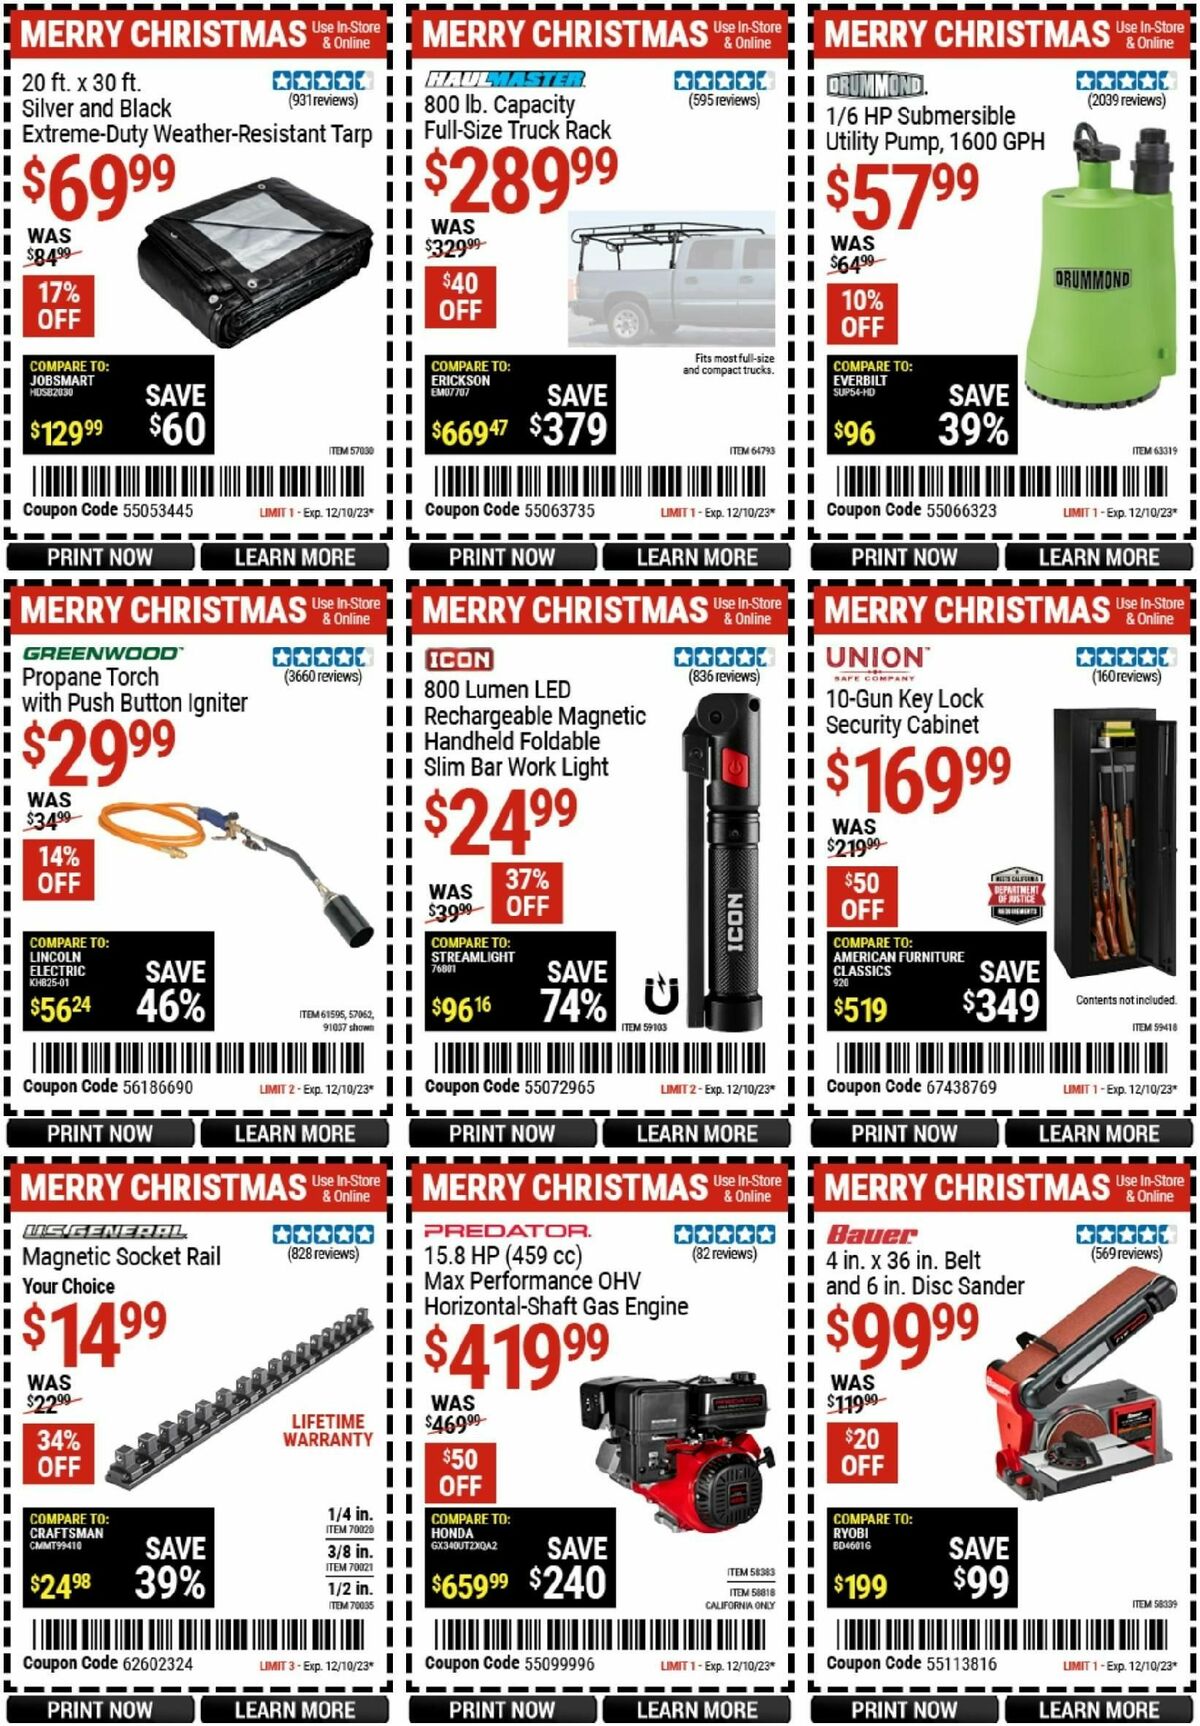 Harbor Freight Tools Weekly Ad from November 28